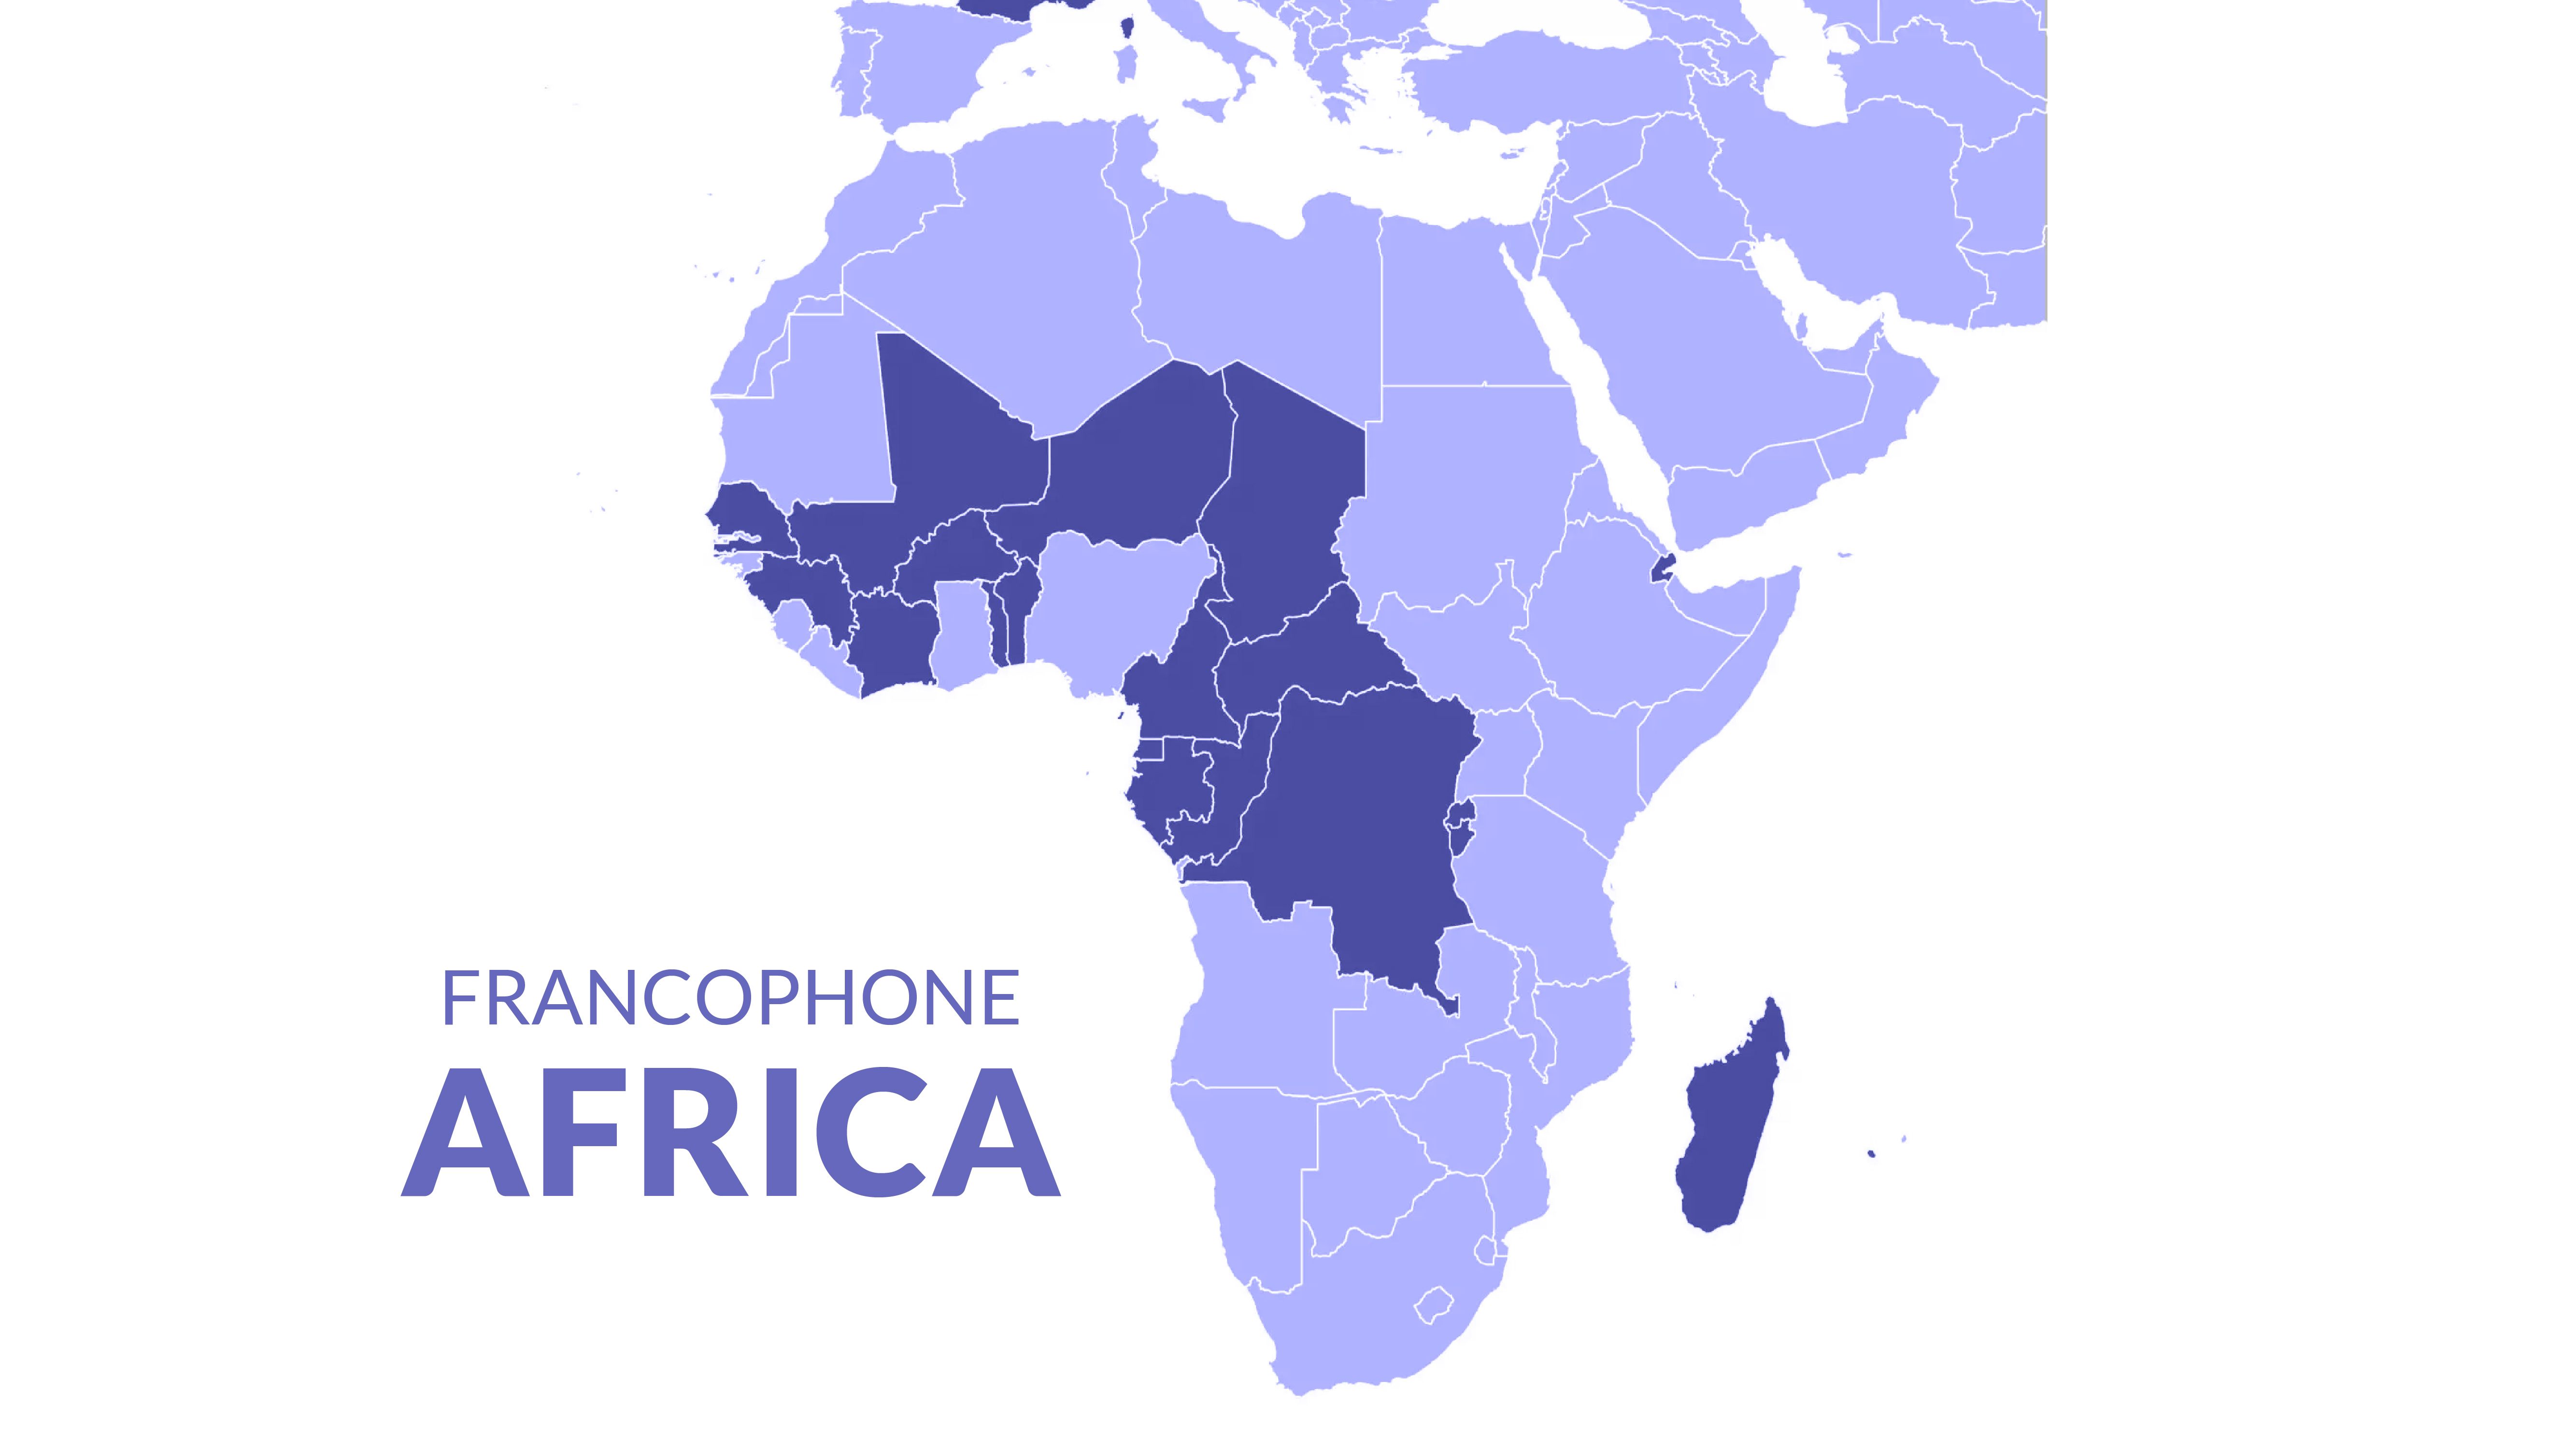 A map of Francophone Africa.